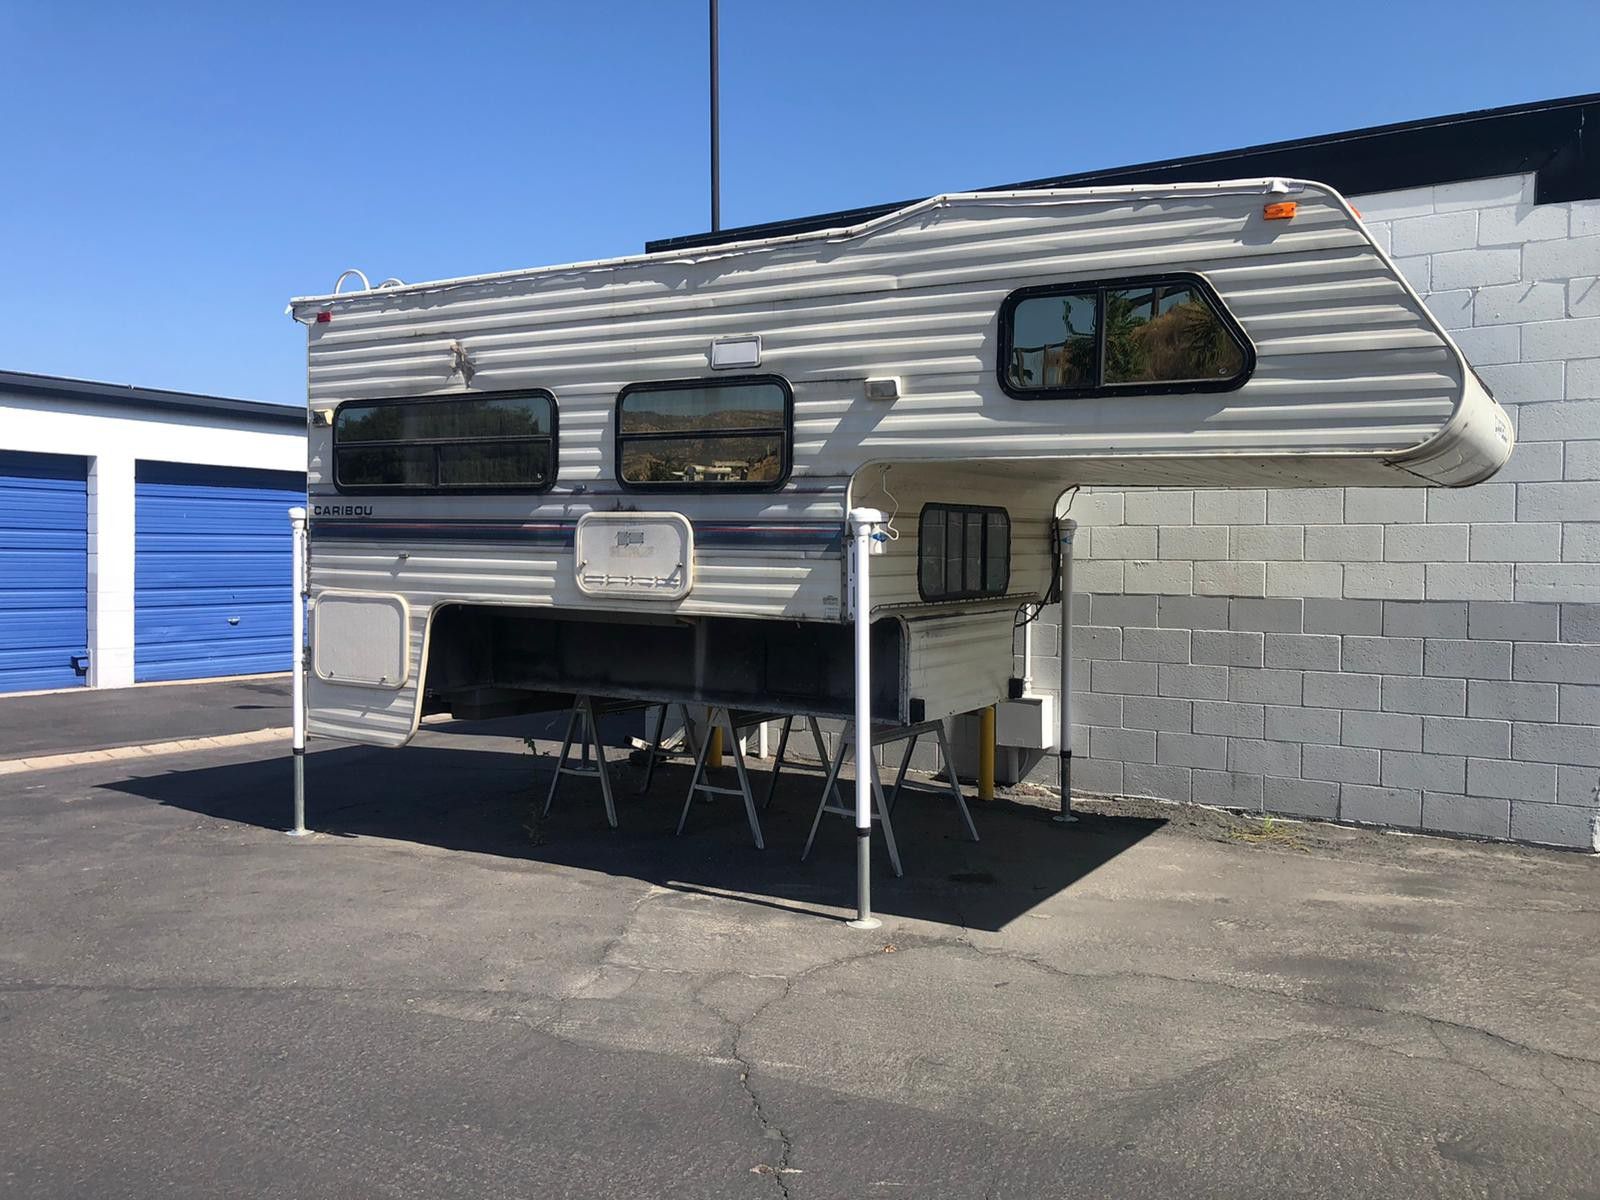 1993 Caribou RV Camper, remodeled many updated things! SOLAR & Elec. Jack's!